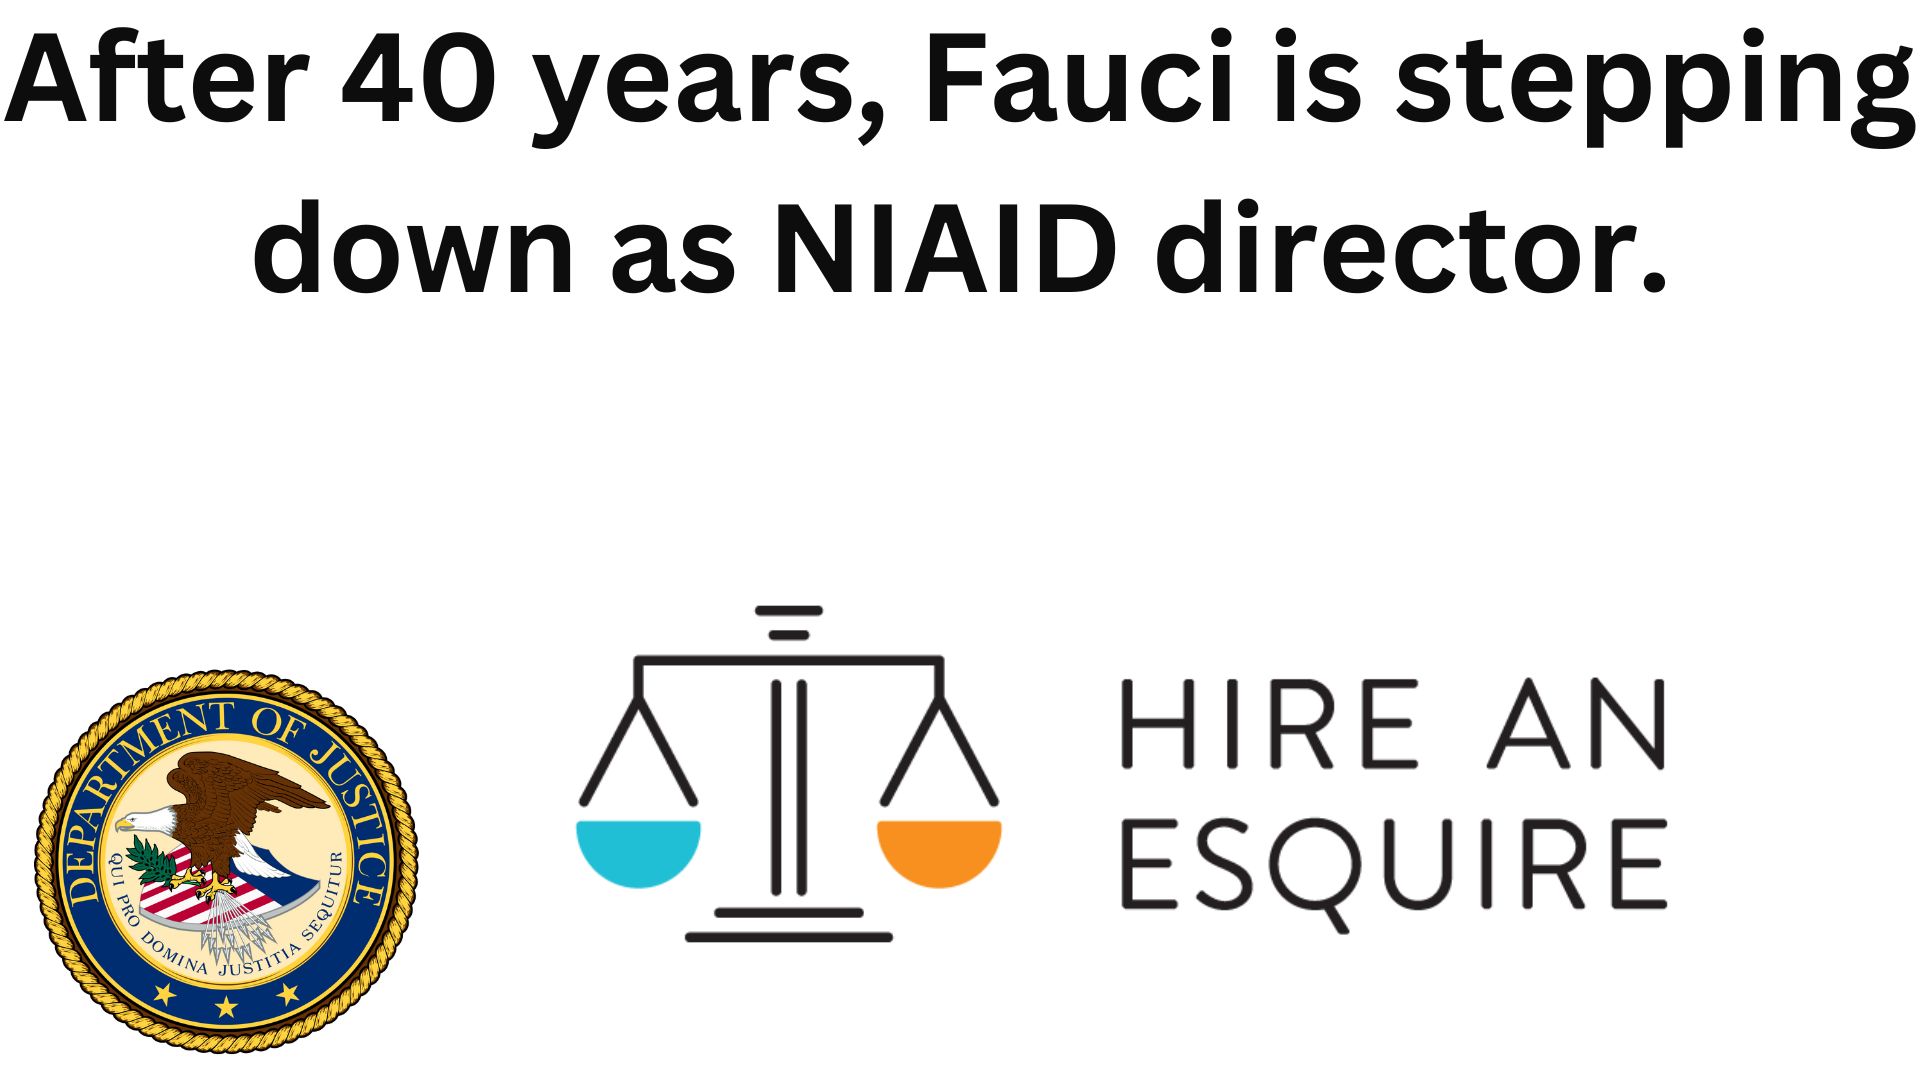 After 40 years, fauci is stepping down as niaid director.